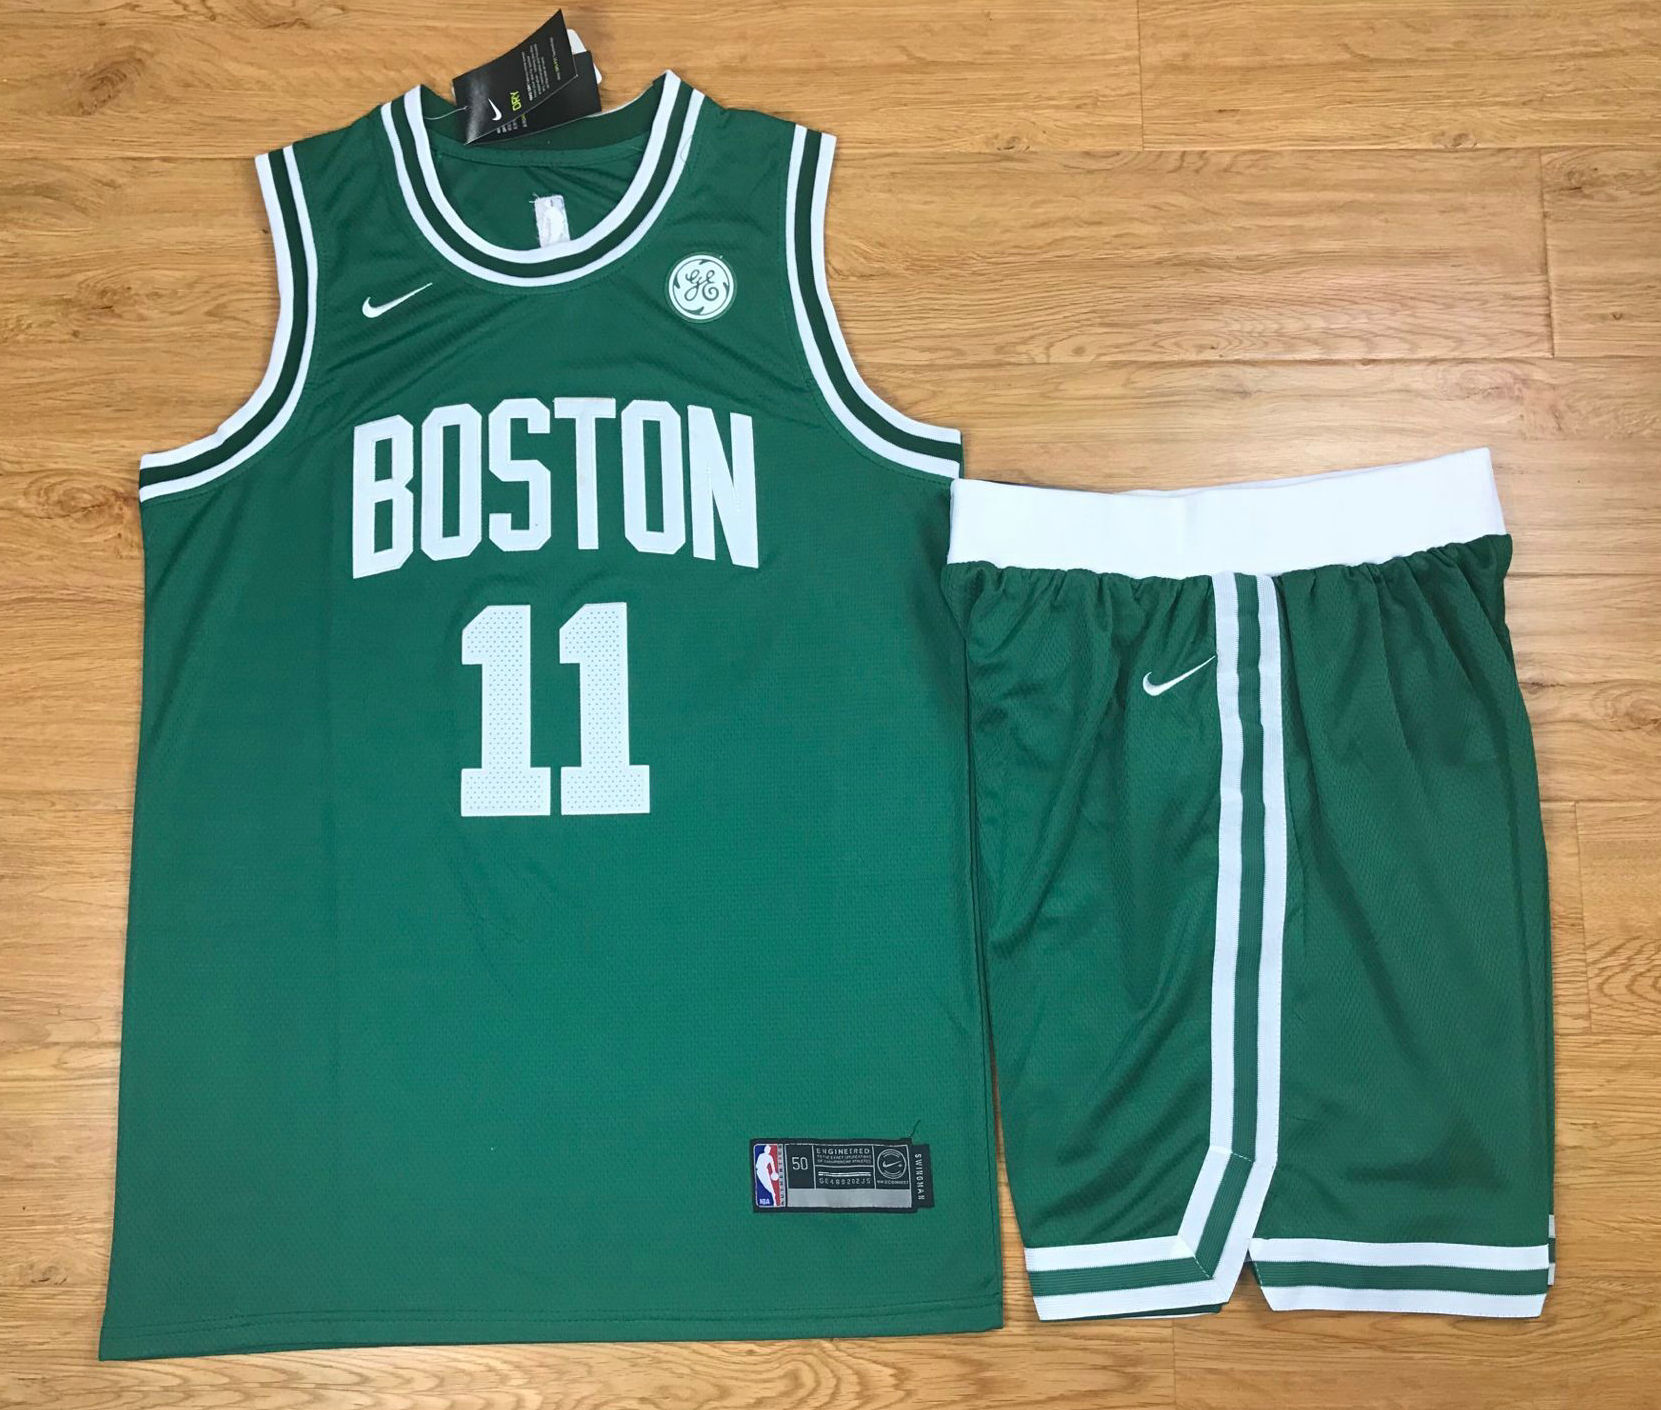 kyrie irving green jersey